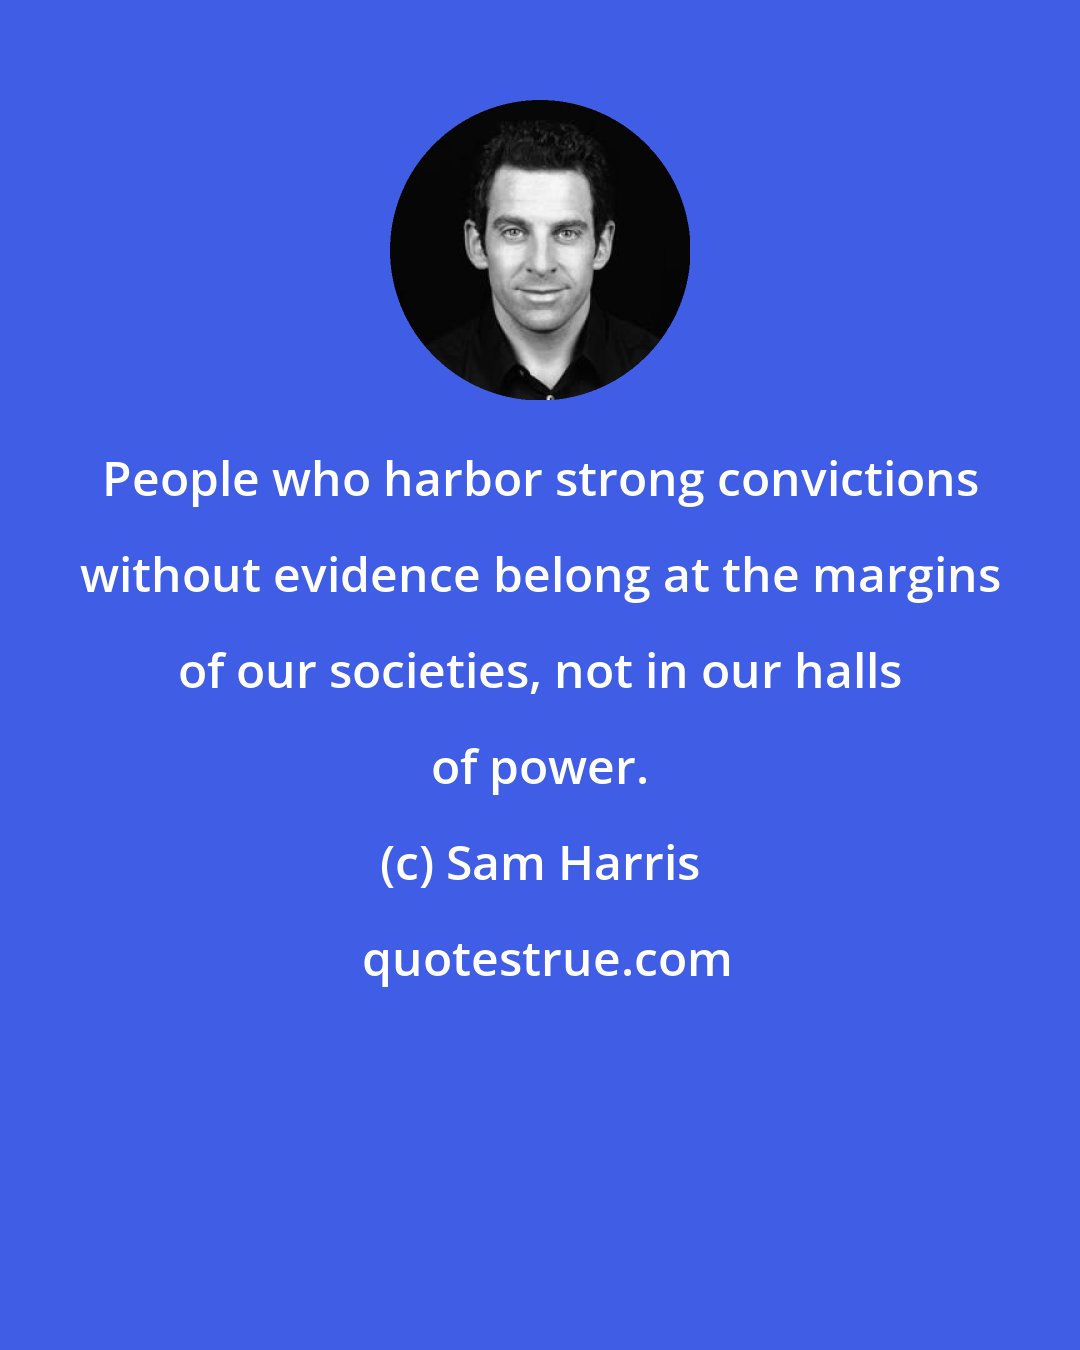 Sam Harris: People who harbor strong convictions without evidence belong at the margins of our societies, not in our halls of power.